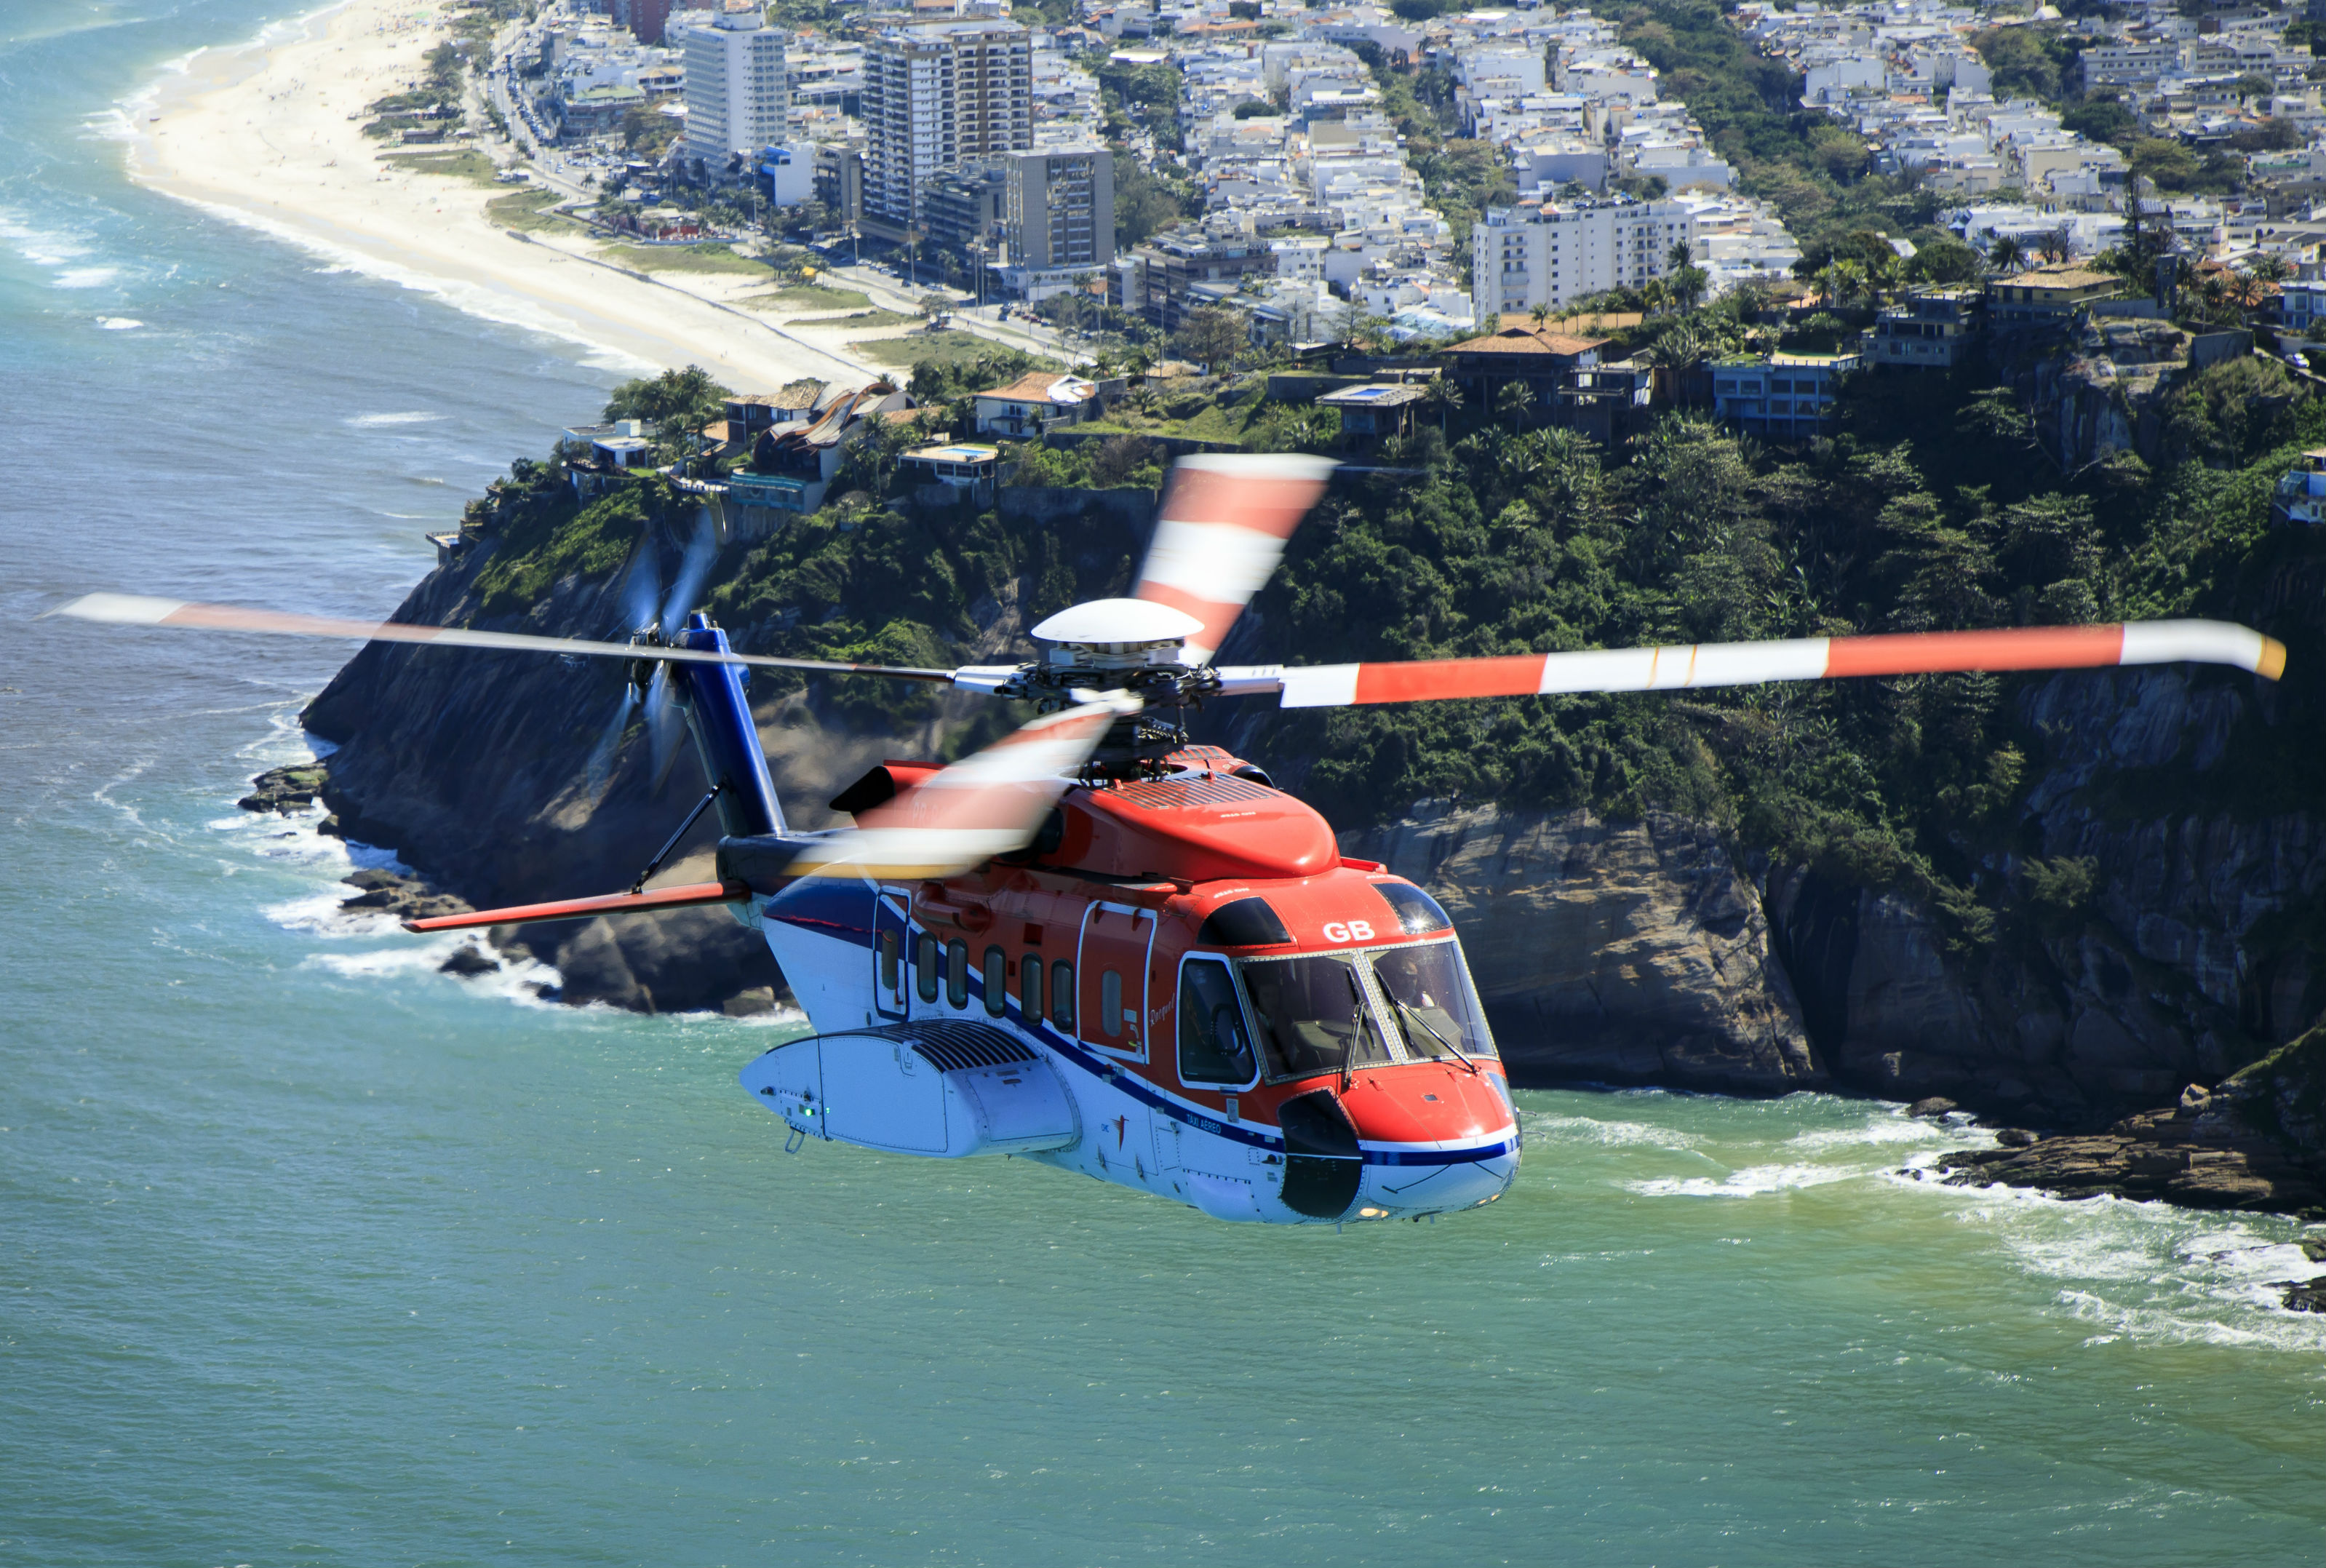 Statoil’s missions will be supported by a Sikorsky S-92, owned by CHC Brazil. CHC Photo